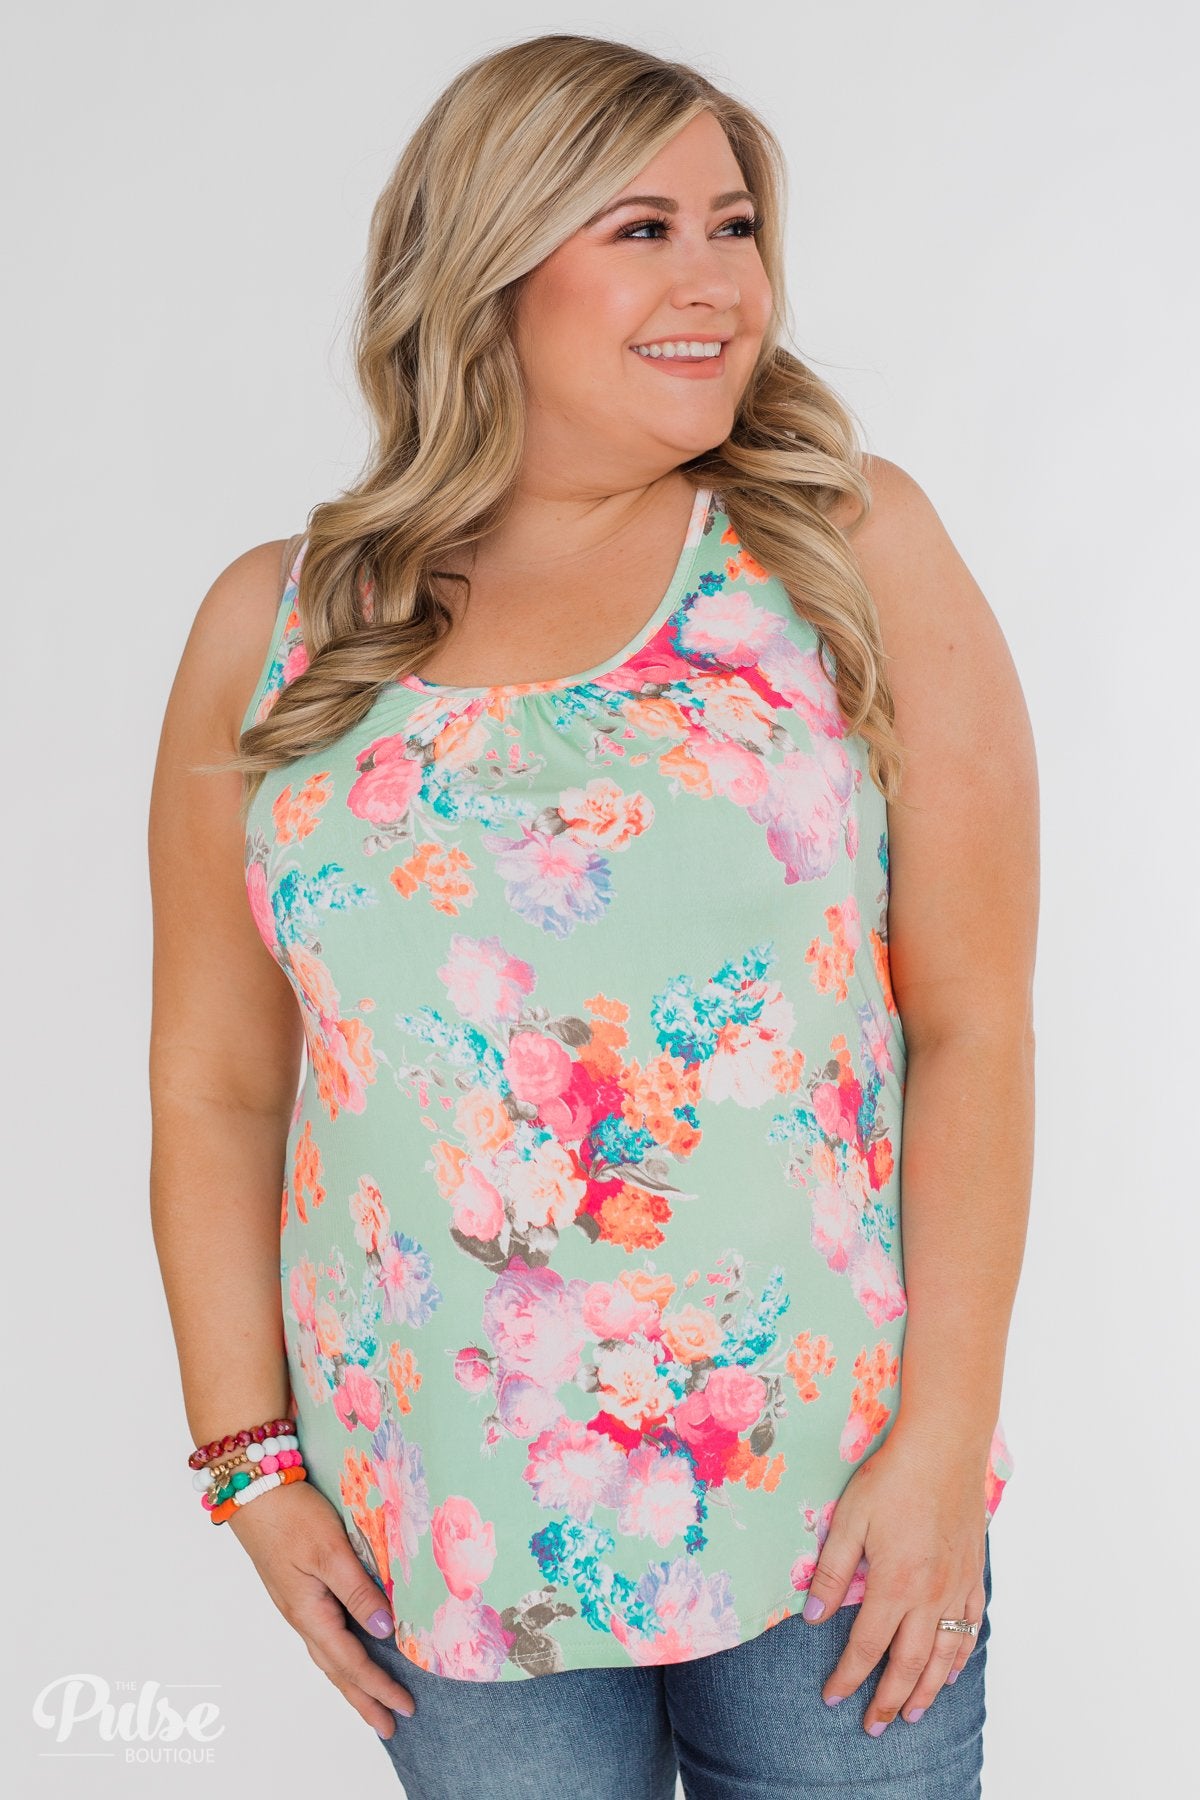 A Coral Floral Summer Tank- Mint